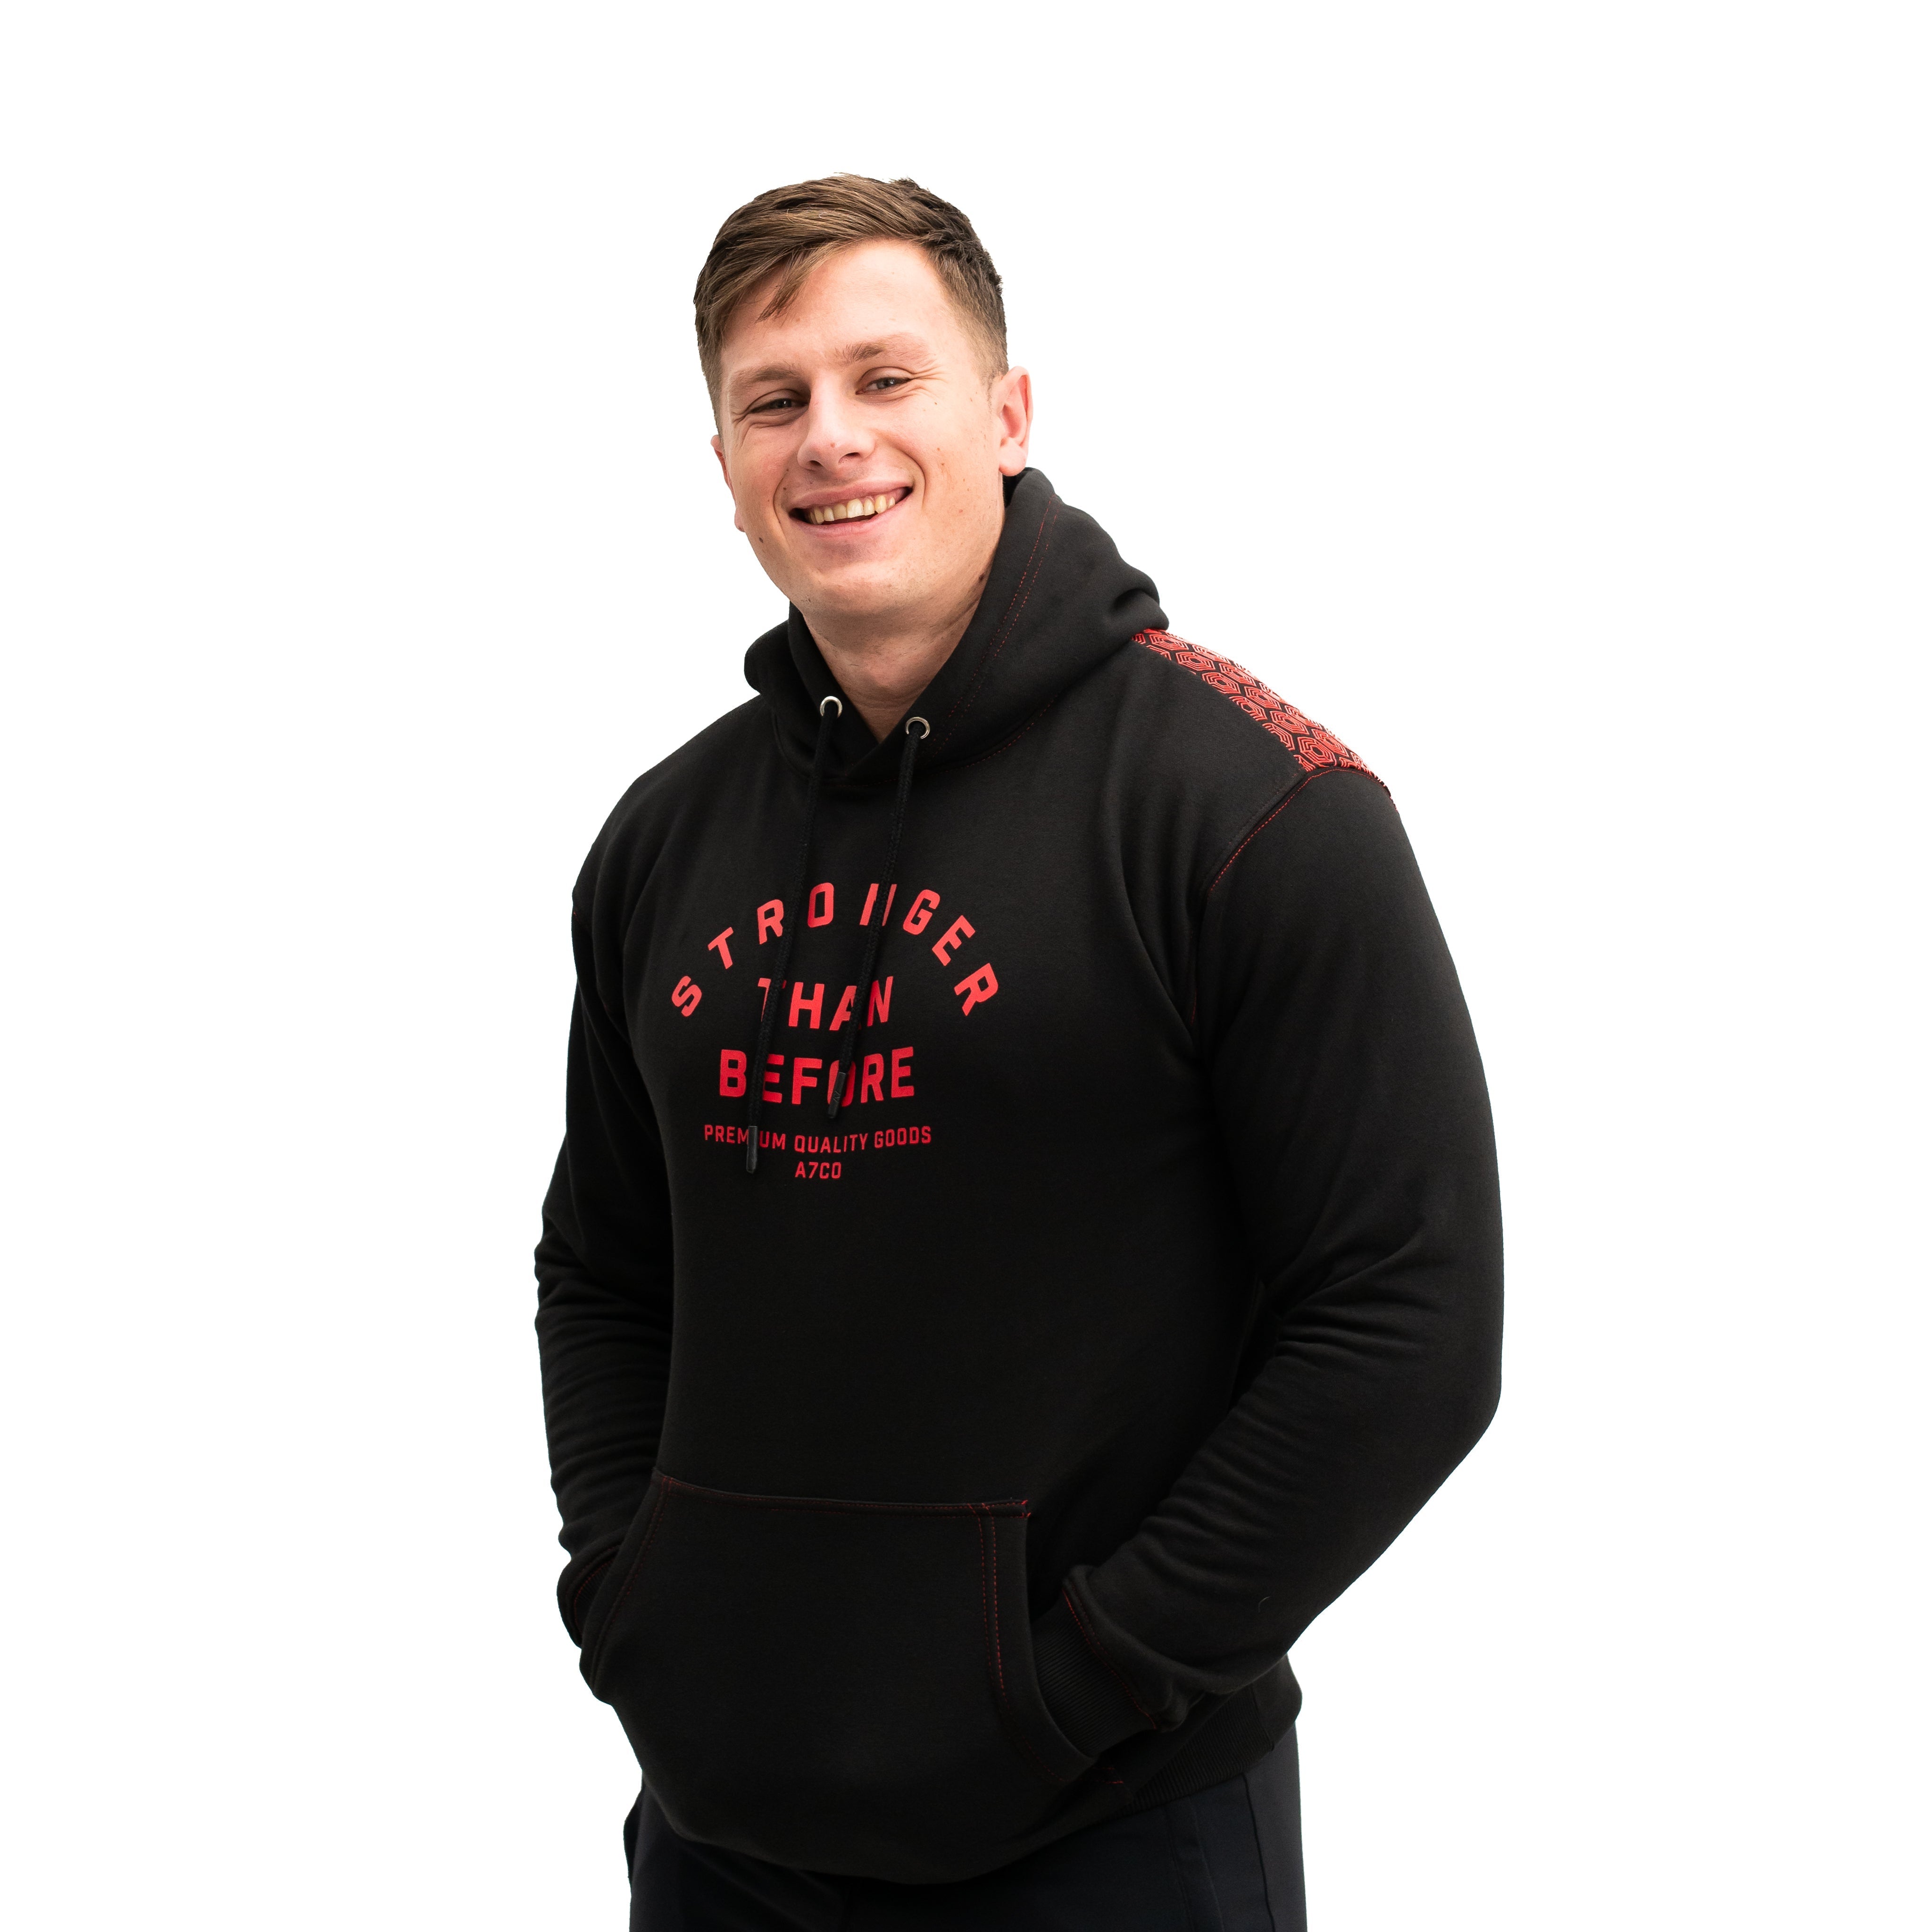 The Through Time Bar Grip Hoodie reminds us we can conquer challenges and make an impact. The future is only the continuation of our progress. Purchase Through Time Bar Grip Hoodie from A7 UK and A7 Europe. The silicone grip helps with slippery commercial benches and bars and anchors the barbell to your back. A7UK has the best Powerlifting apparel for all workouts. Available in UK and Europe including France, Italy, Germany, the Netherlands, Sweden and Poland.